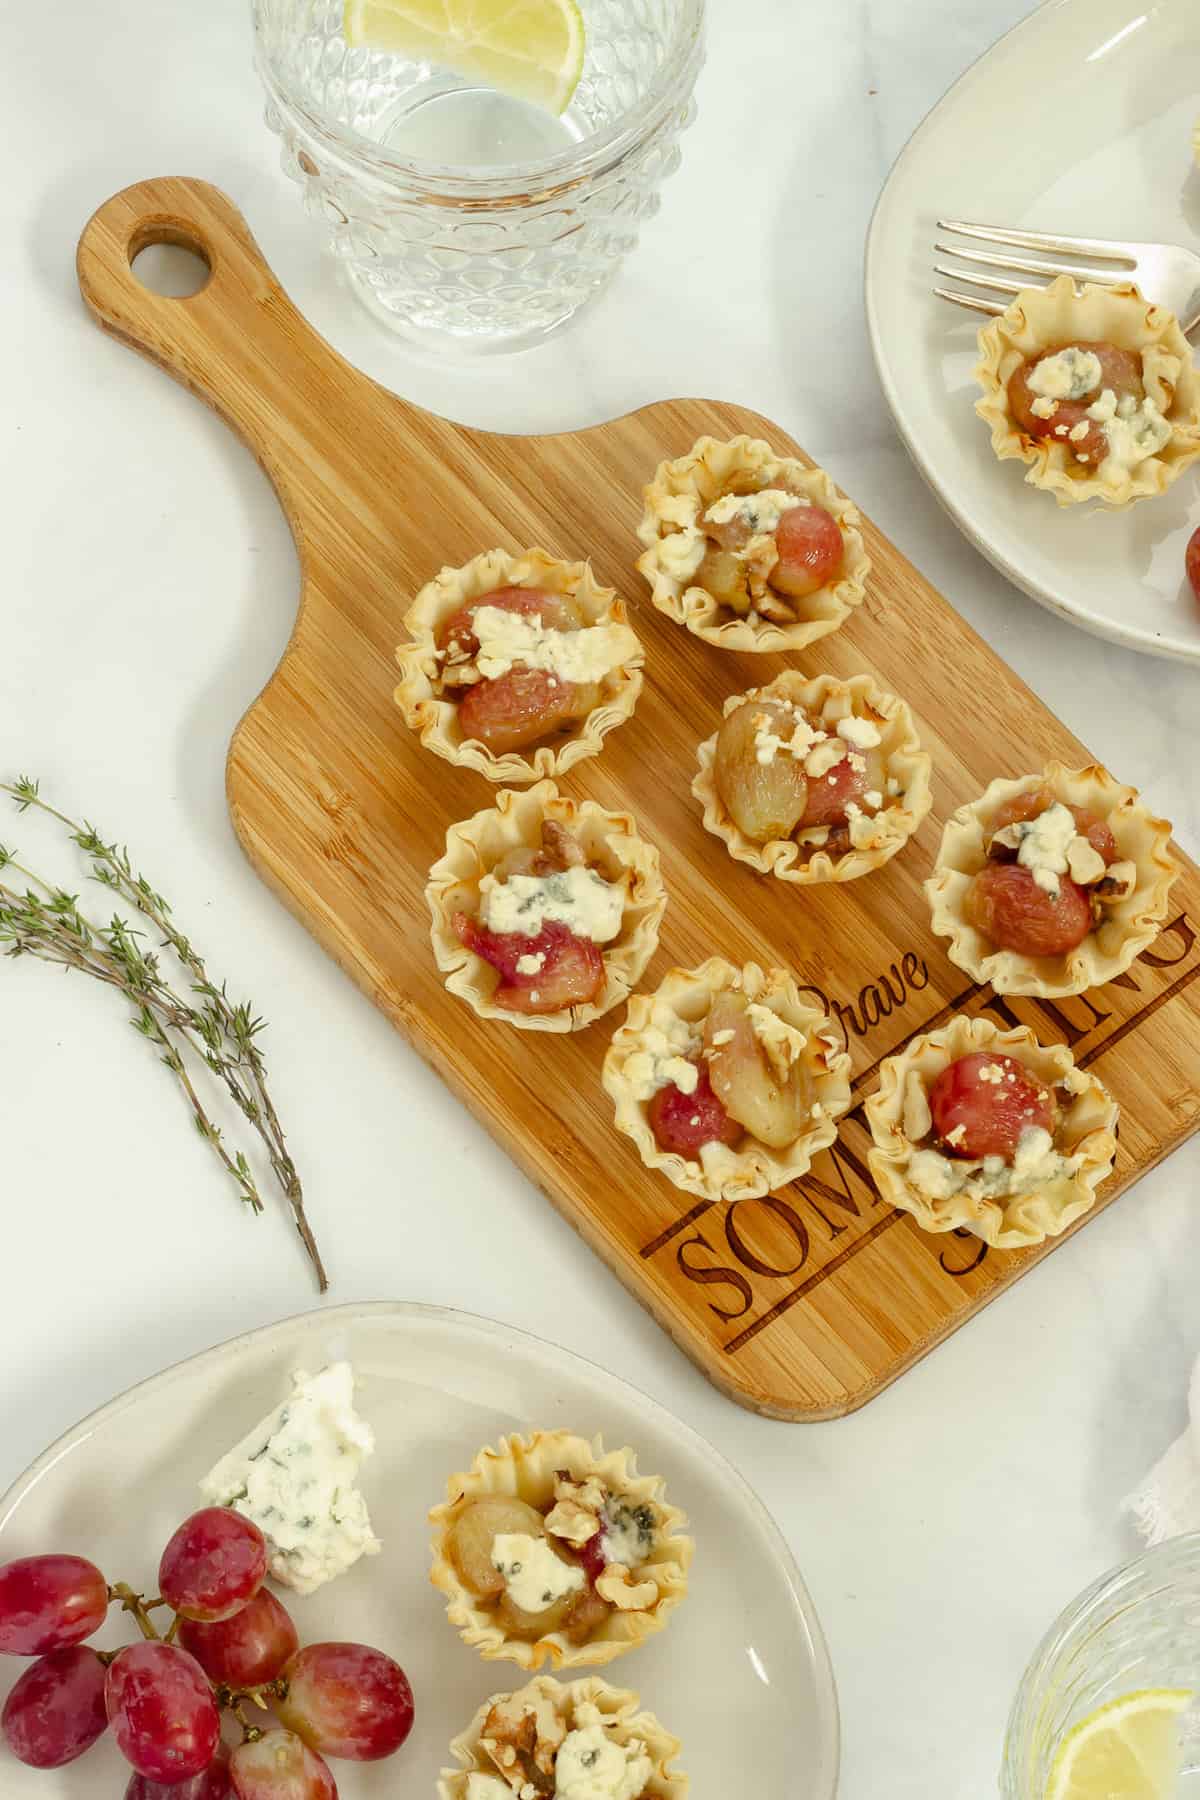 A cheese board with roasted grapes phyllo cup appetizers. Two serving plates with cheese, grapes, and the appetizer cups are in the background.